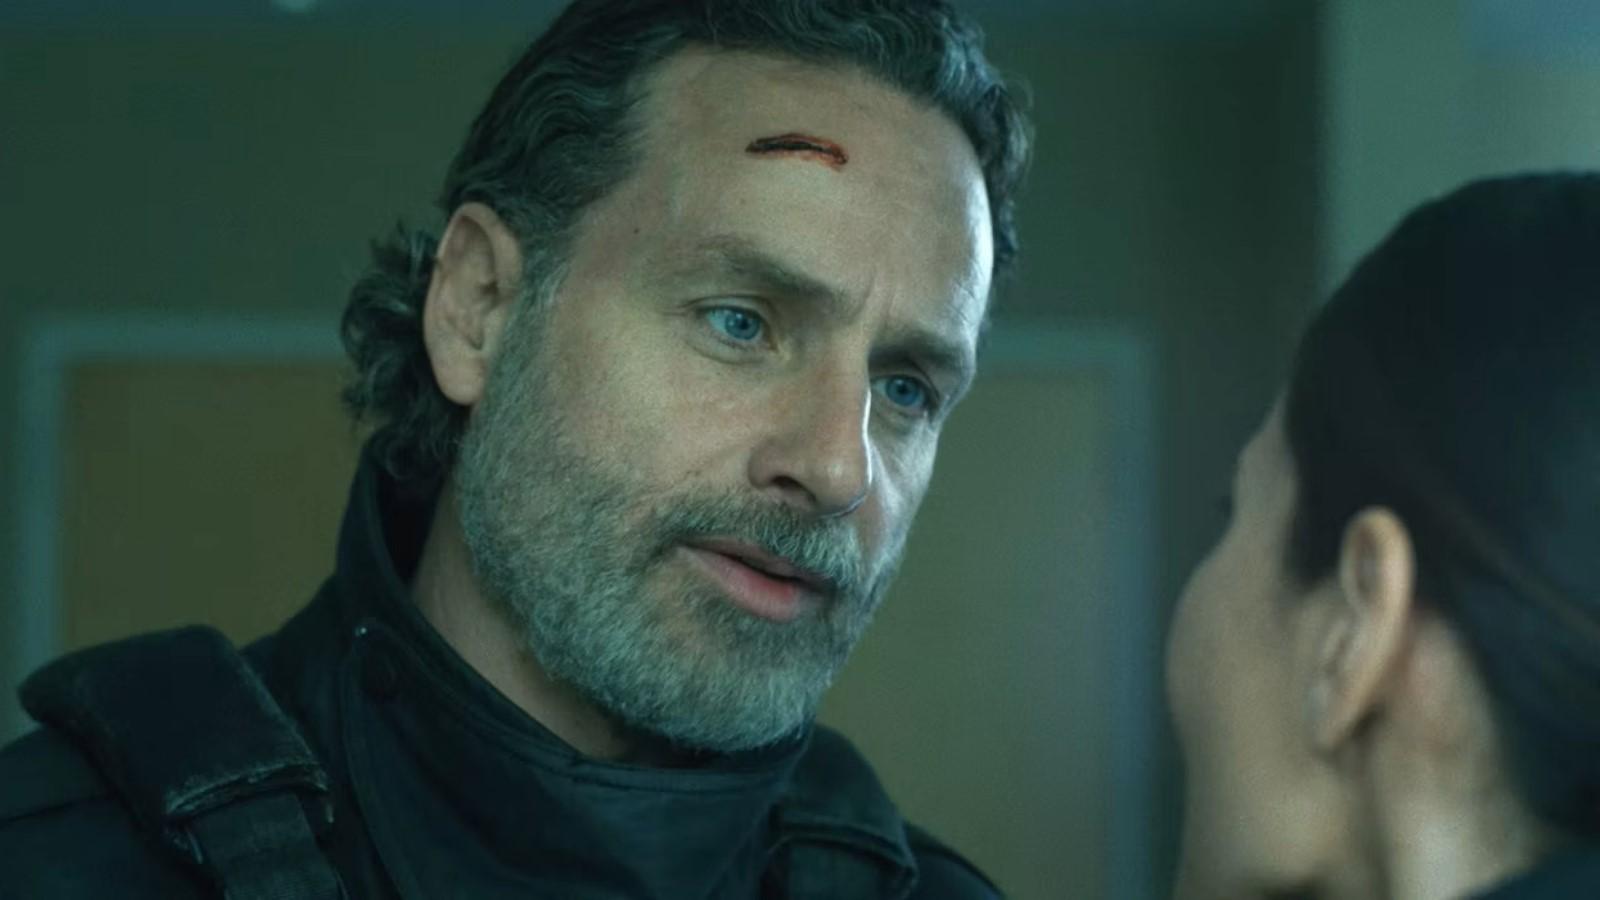 Andrew Lincoln as Rick Grimes in The Walking Dead The Ones Who Live Episode 6